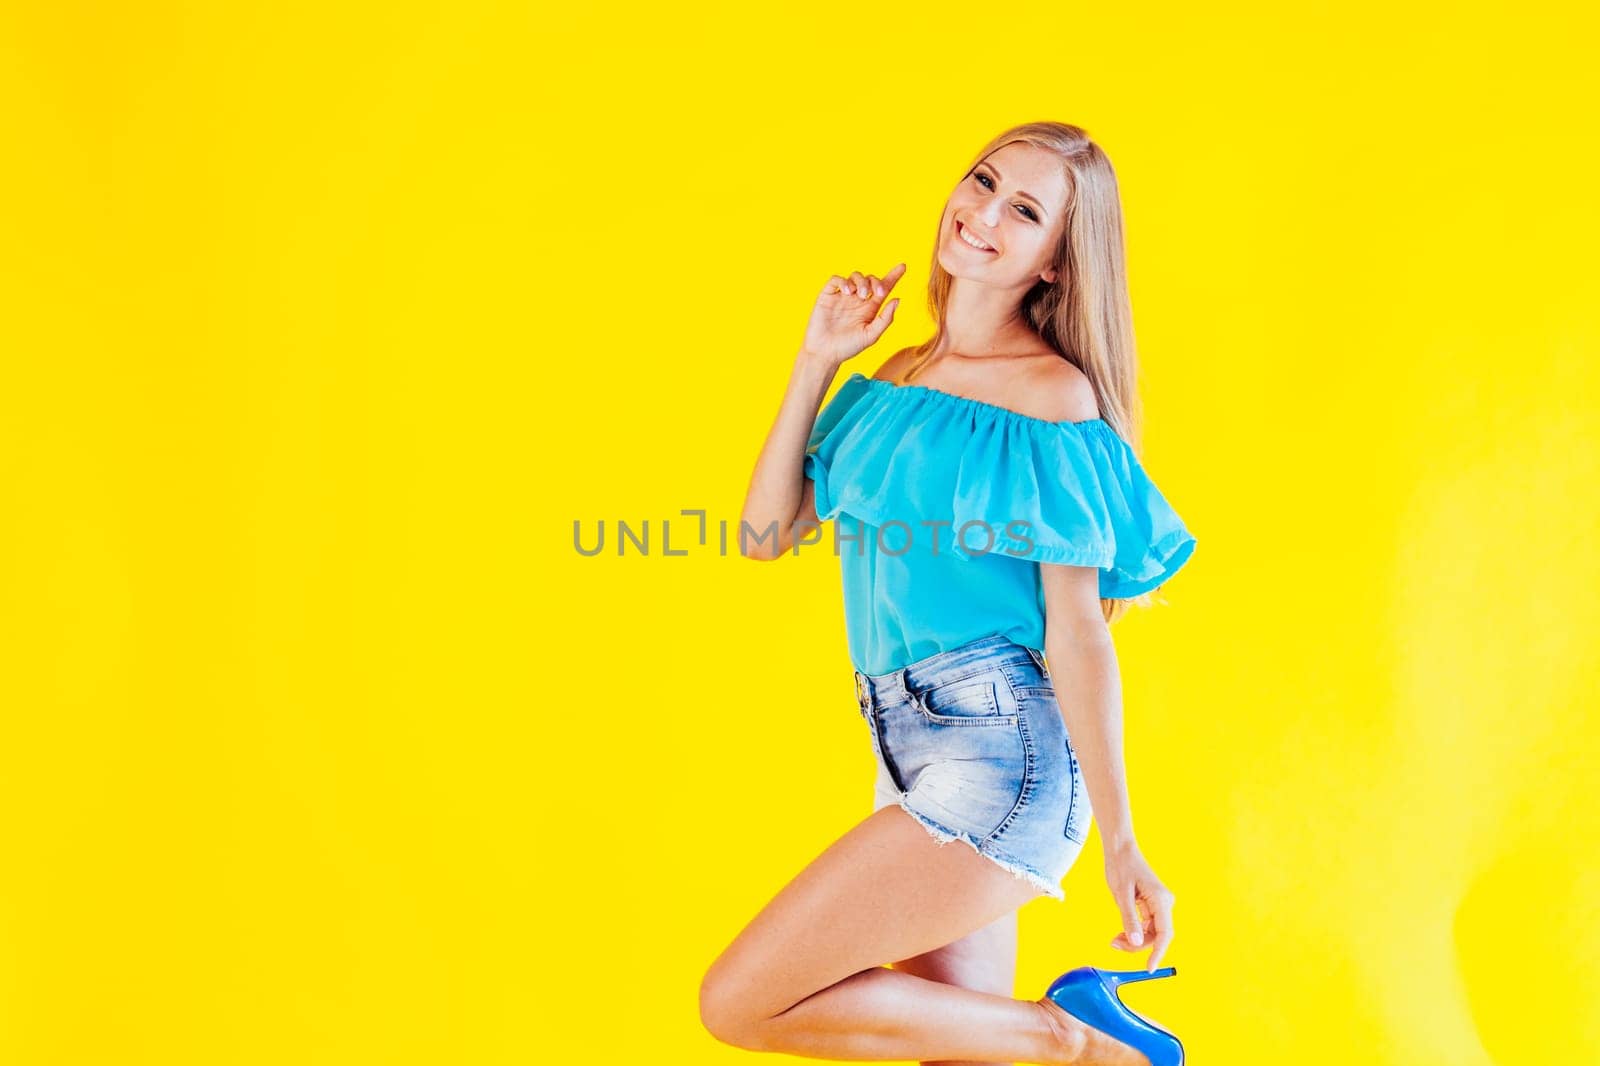 beautiful blonde girl on a yellow background in blue dress by Simakov